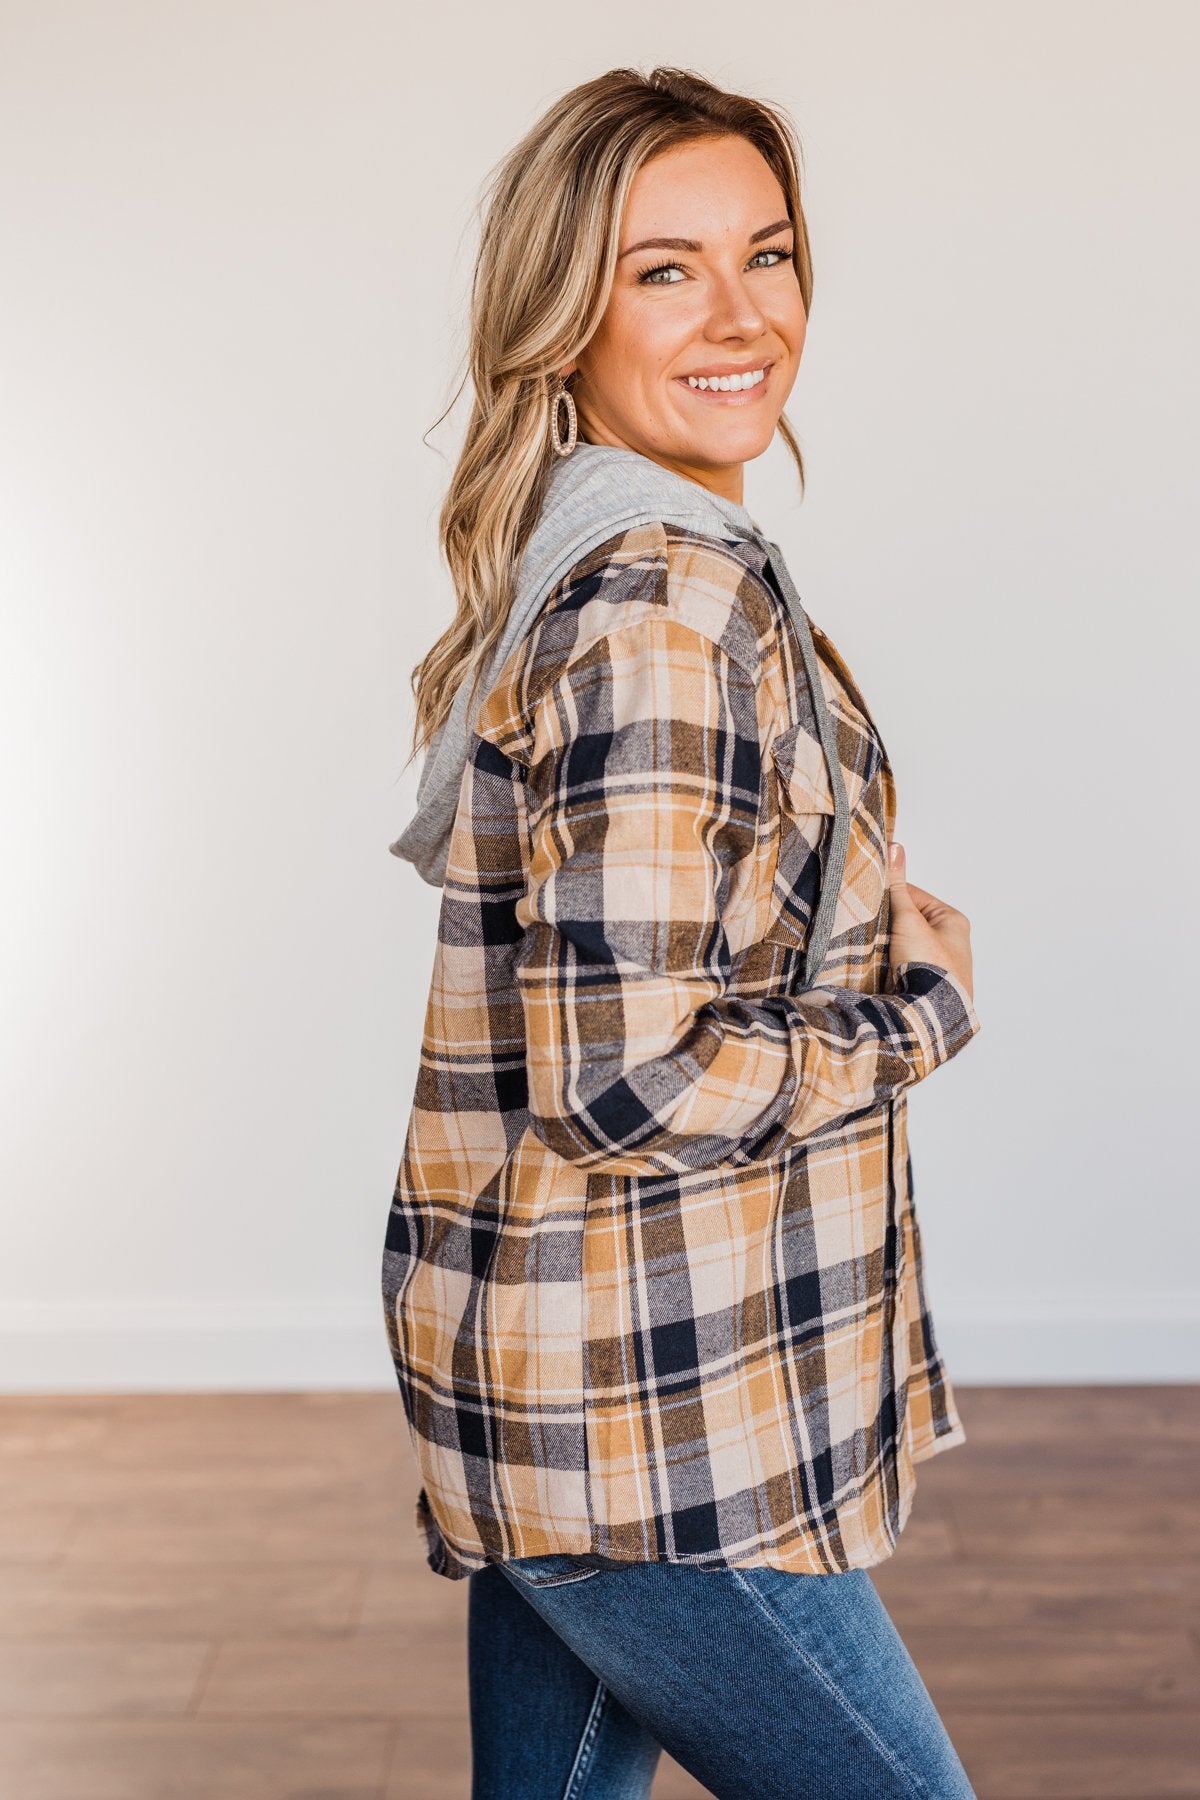 Stay With Me Hooded Plaid Top- Navy, Mustard, & Taupe